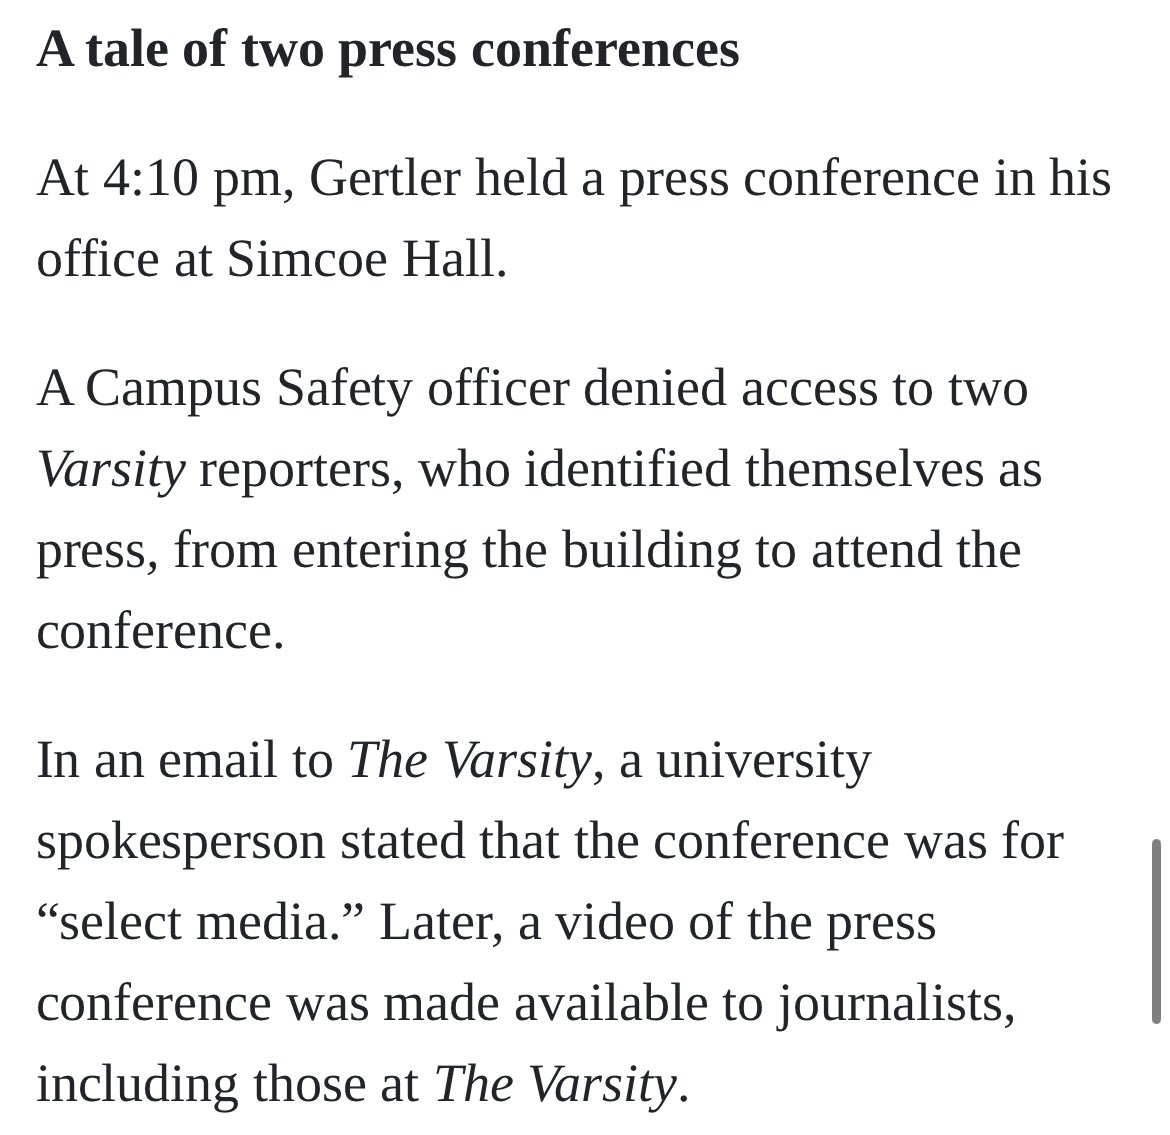 So @UofT held a press conference which wasn’t open to their own campus media?! Reporters at @TheVarsity have been doing an amazing job covering the encampment (and have a track record of excellent campus coverage) This disrespect to student media is despicable. @CanUniPress